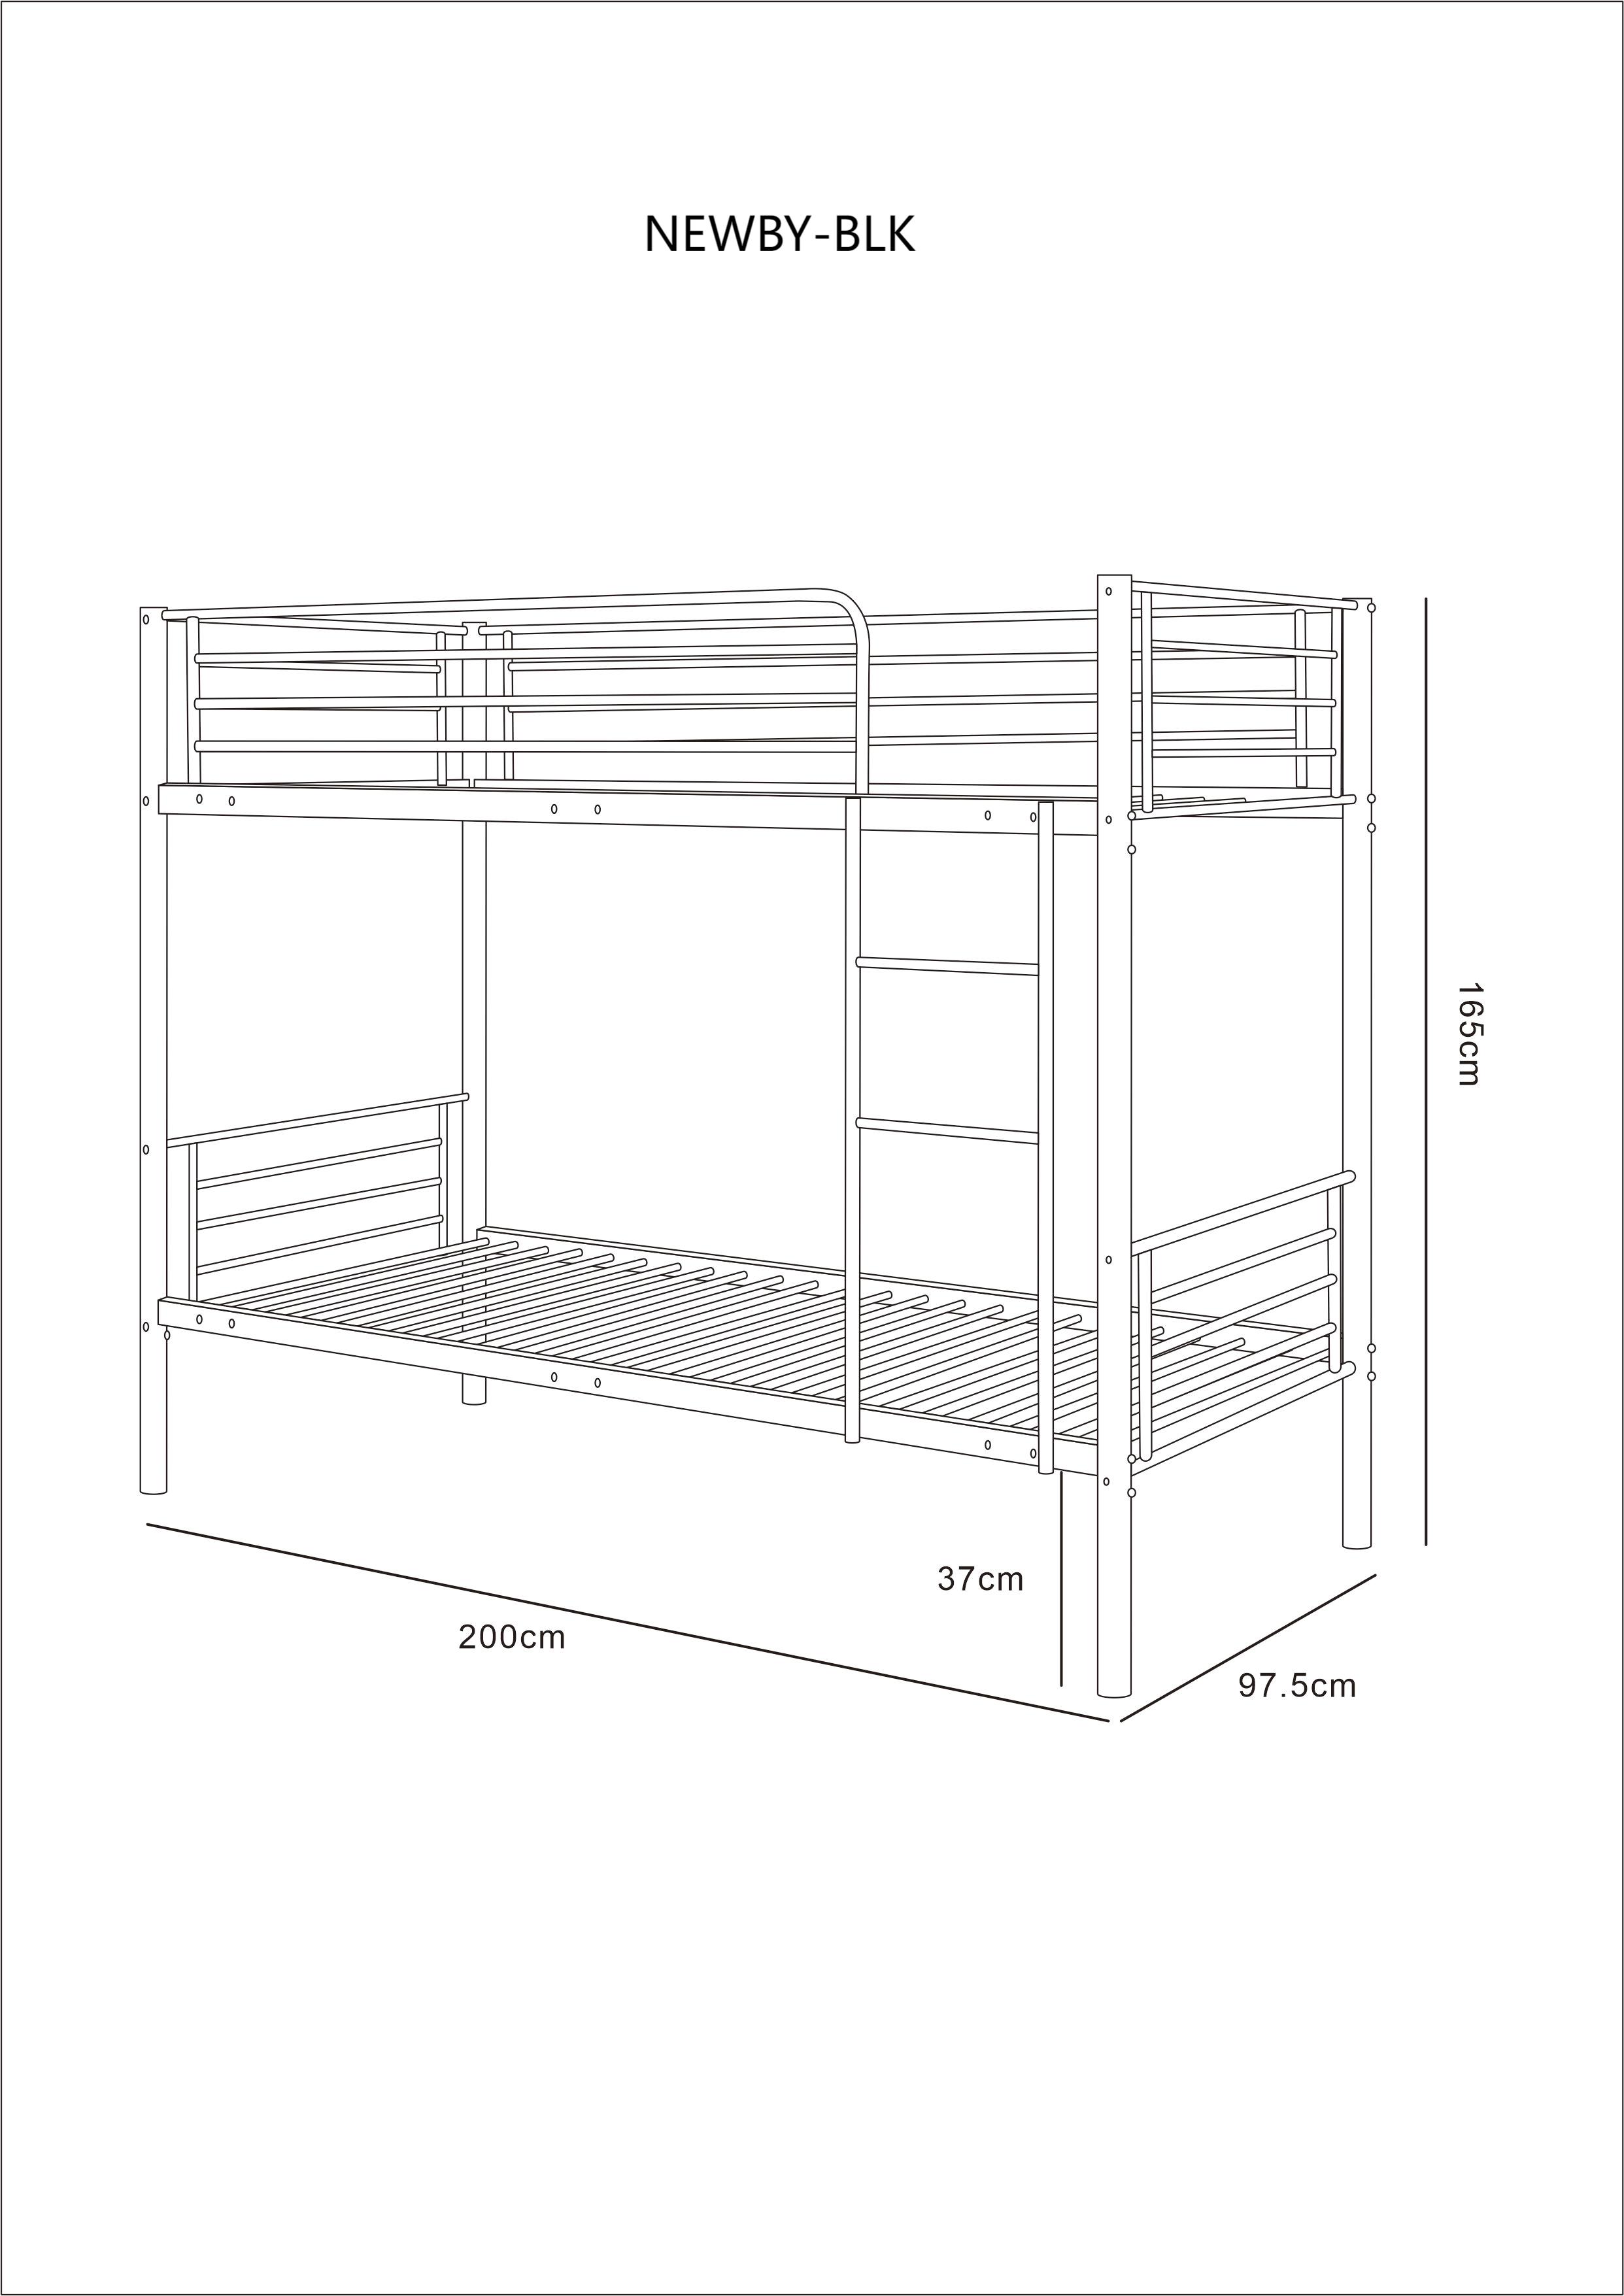 Newby Industrial White Metal Bunk Bed